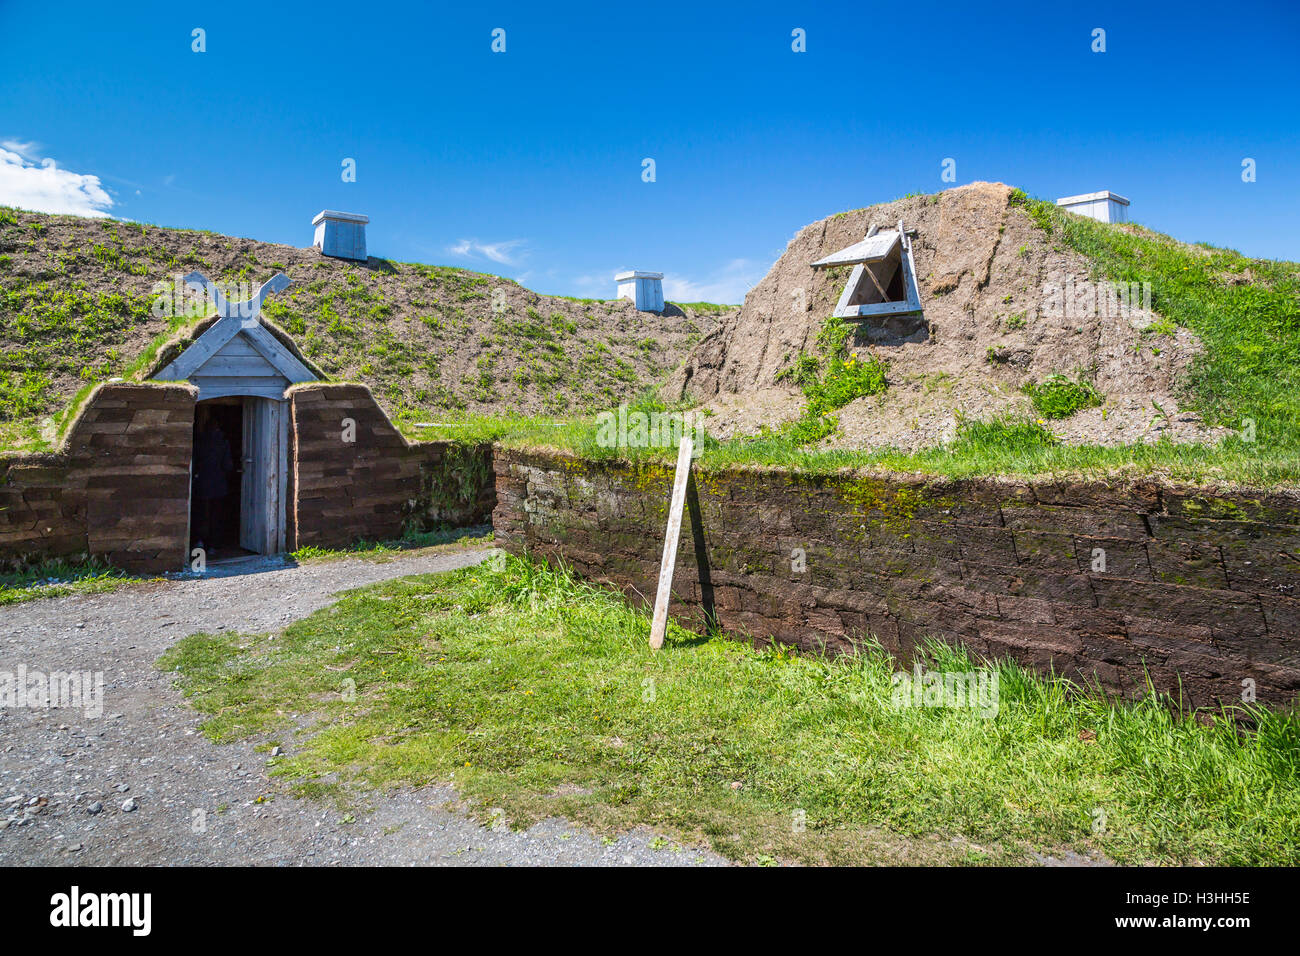 The L'Anse aux Meadows National Historic Site near St. Anthony, Newfoundland and Labrador, Canada. Stock Photo